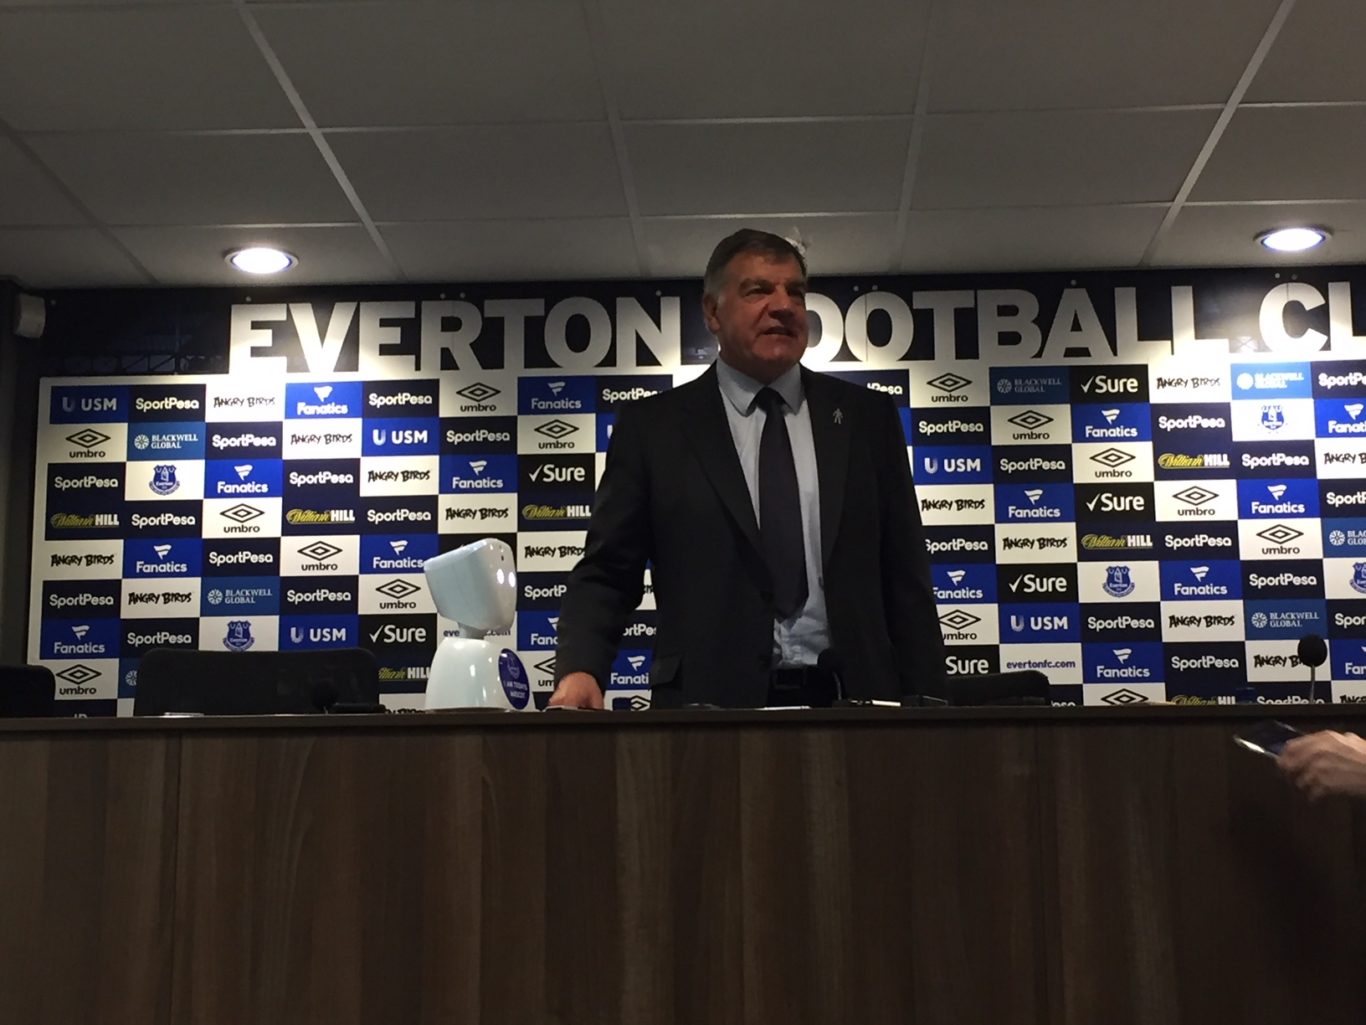 Everton boss Sam Allardyce brought the robot into the post-match press conference